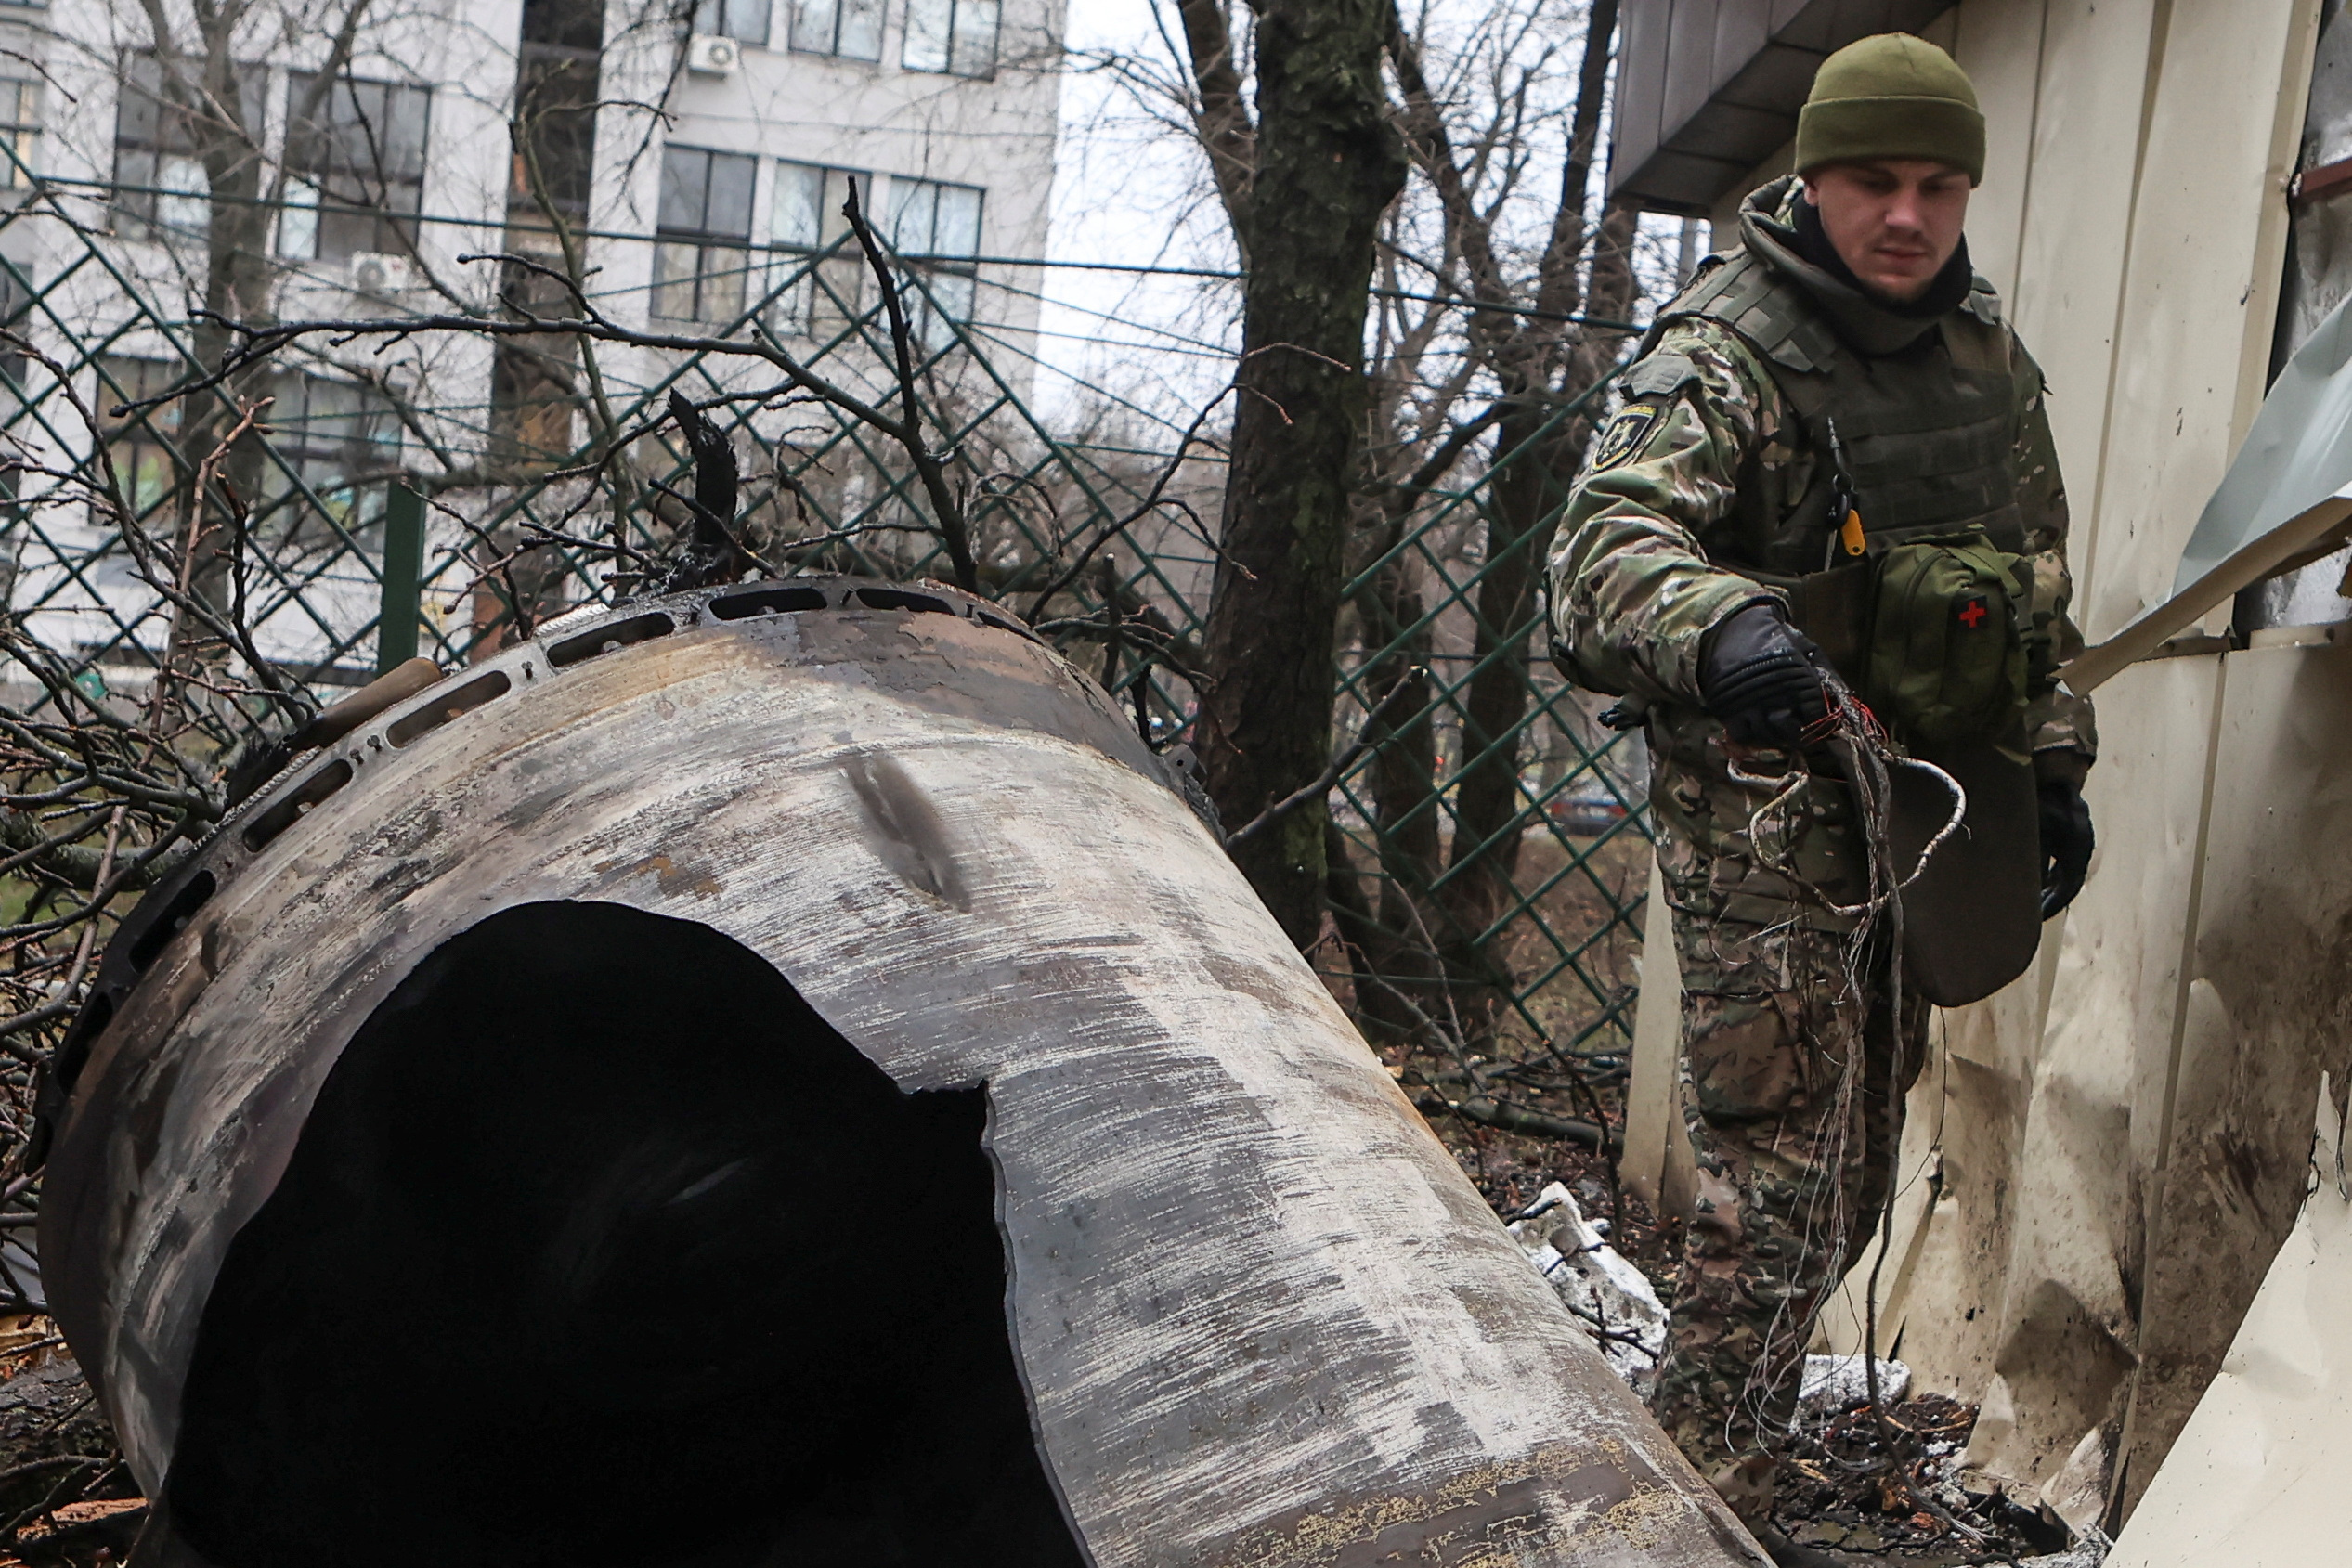 A bomb squad member works next to remains of an unidentified missile at the site where residential buildings were heavily damaged during a Russian missile attack in Kharkiv